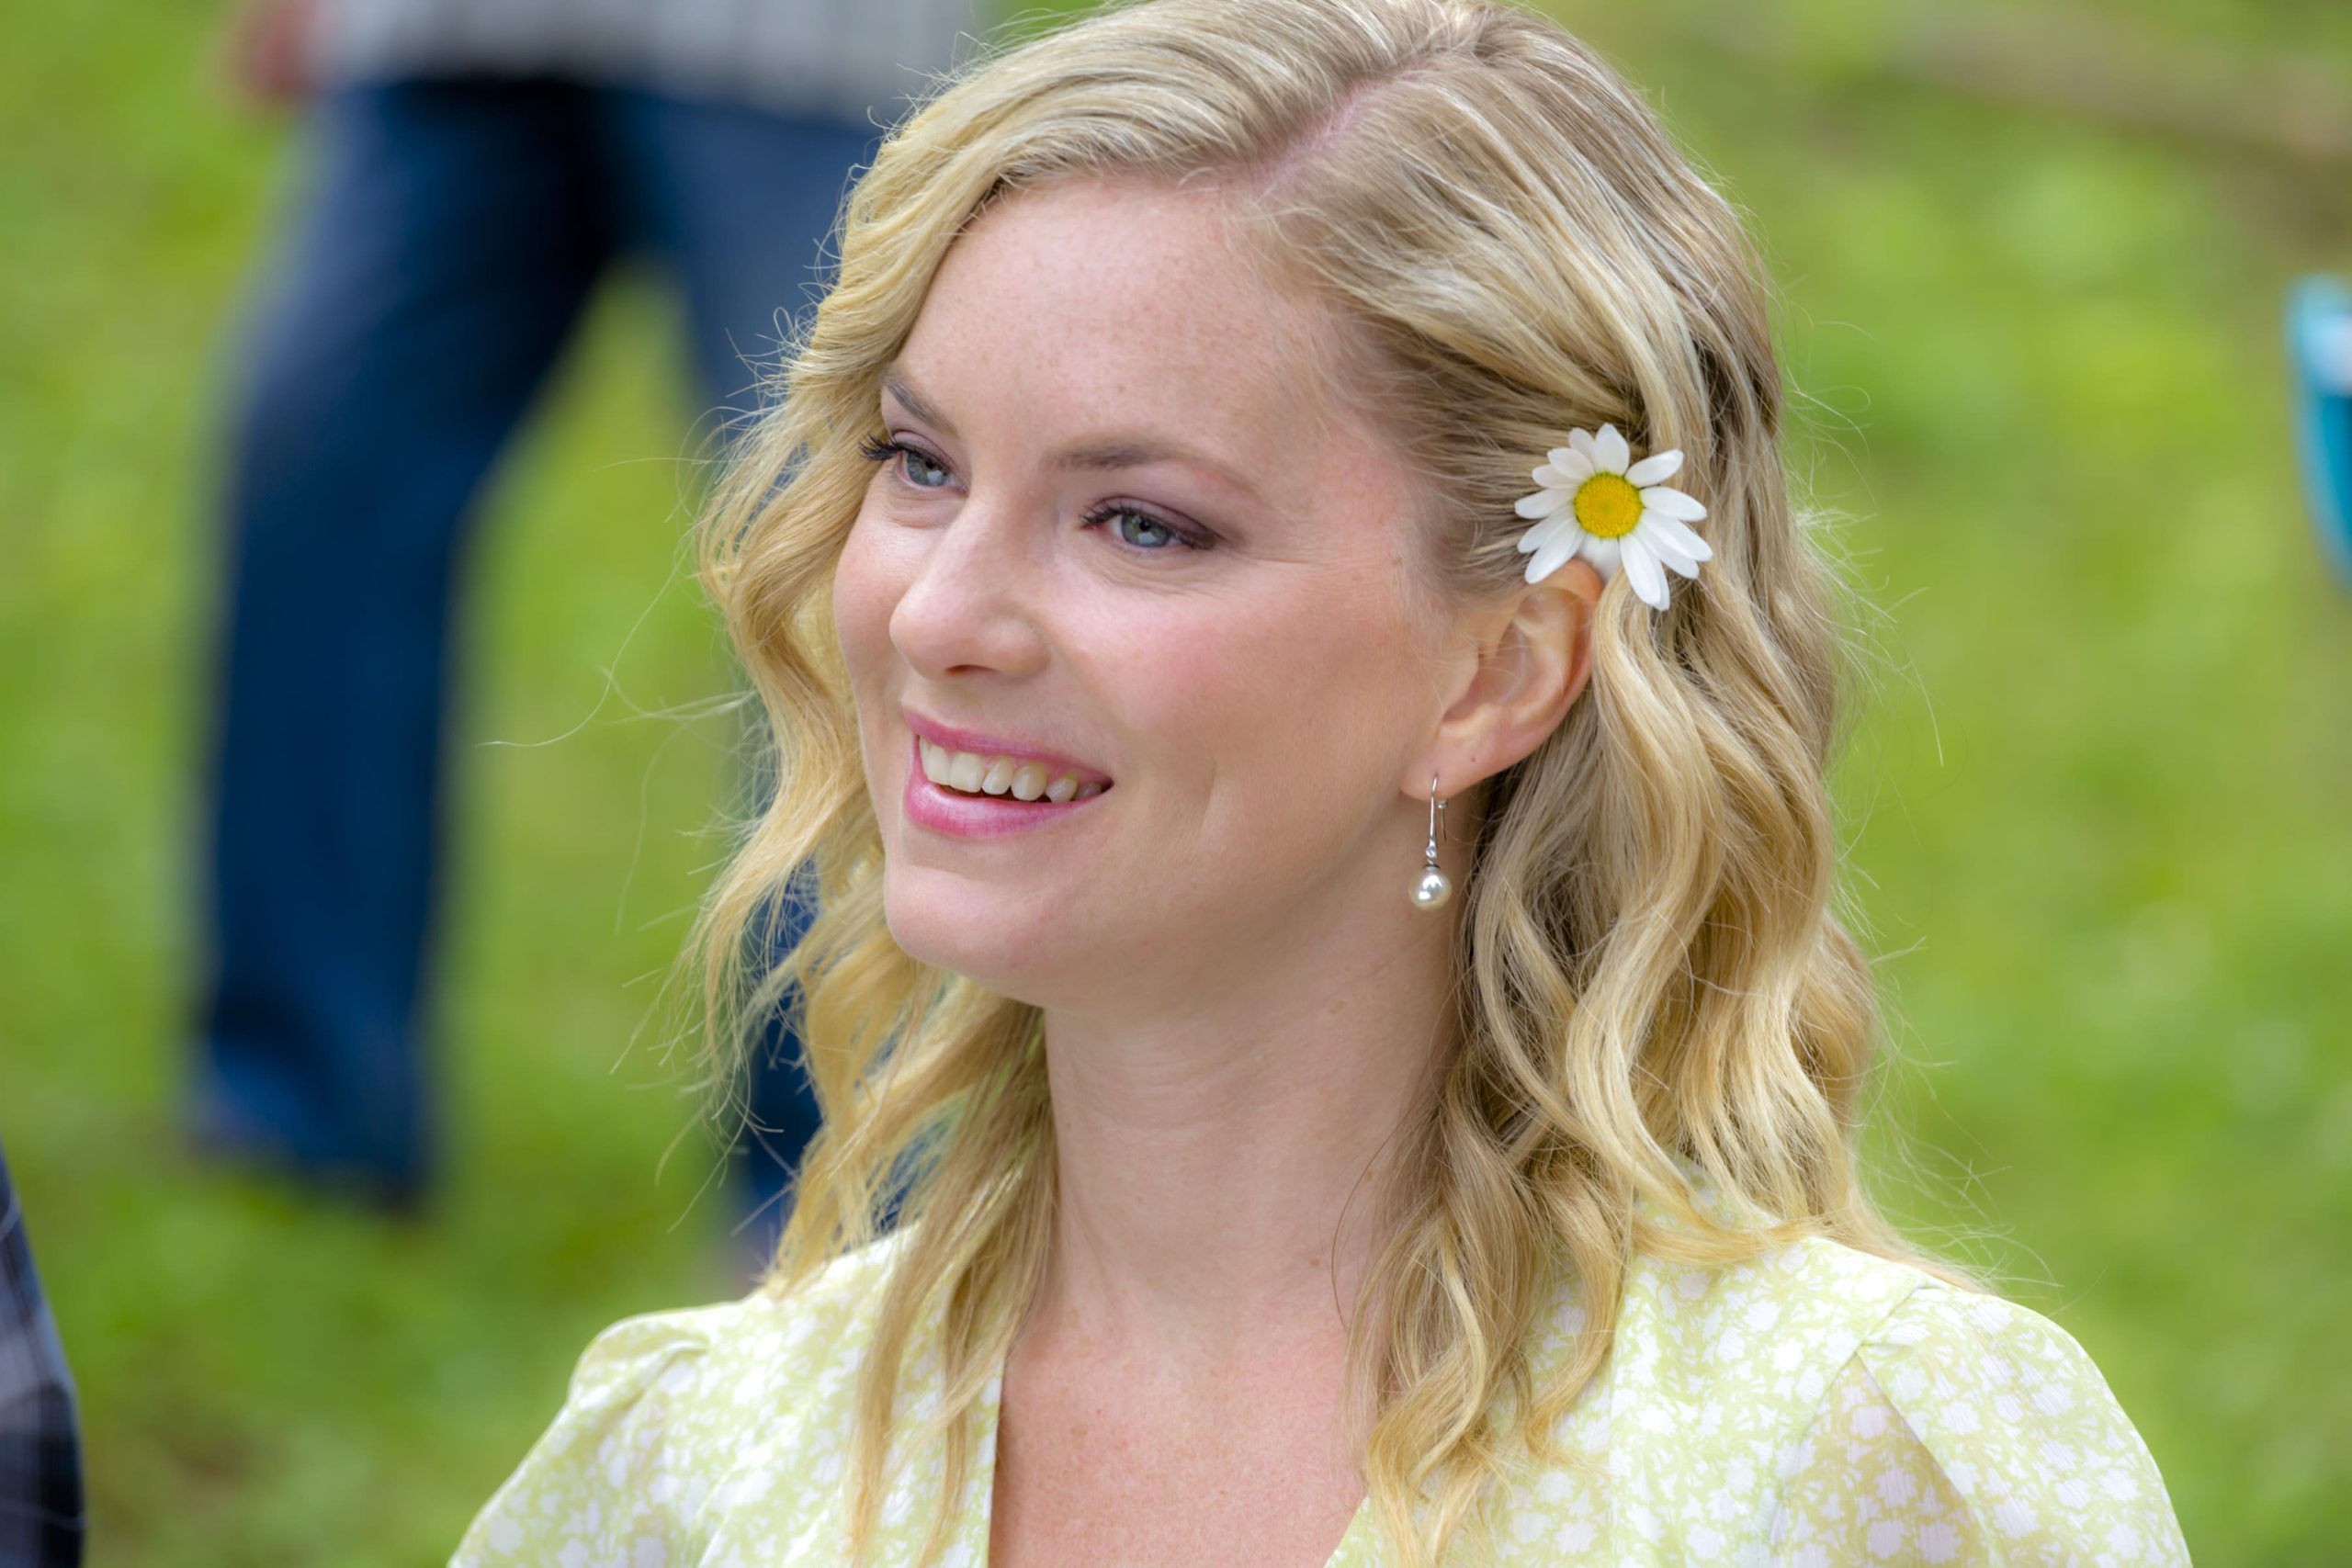 Cindy Busby Wiki, Bio, Age, Net Worth, and Other Facts